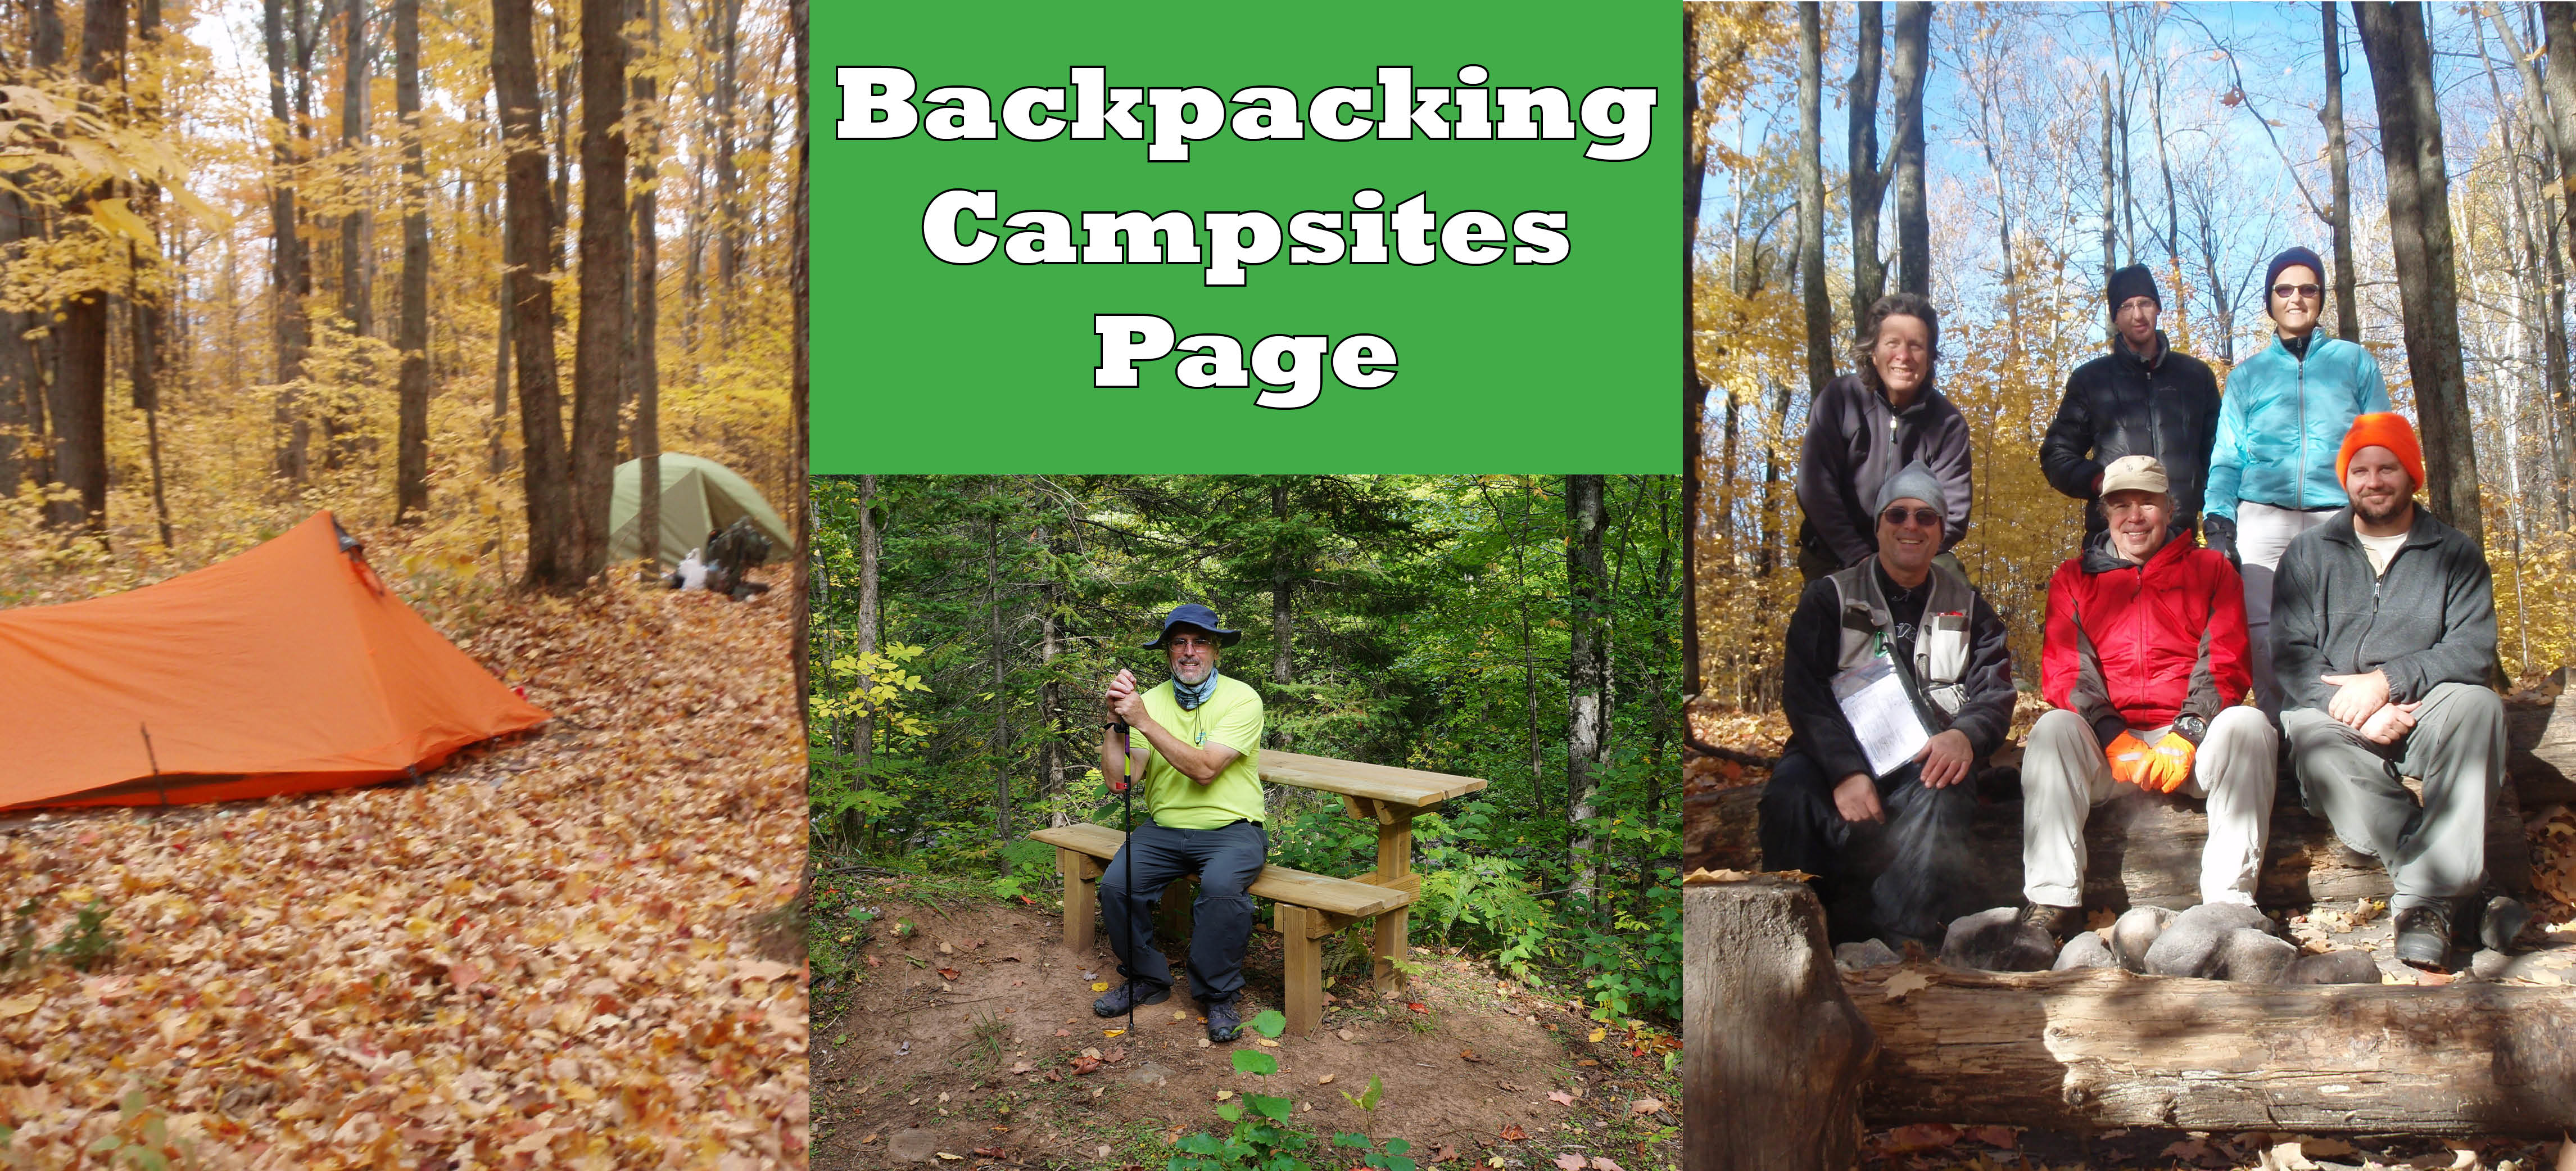 Backpacking Campsite Page  (click here)